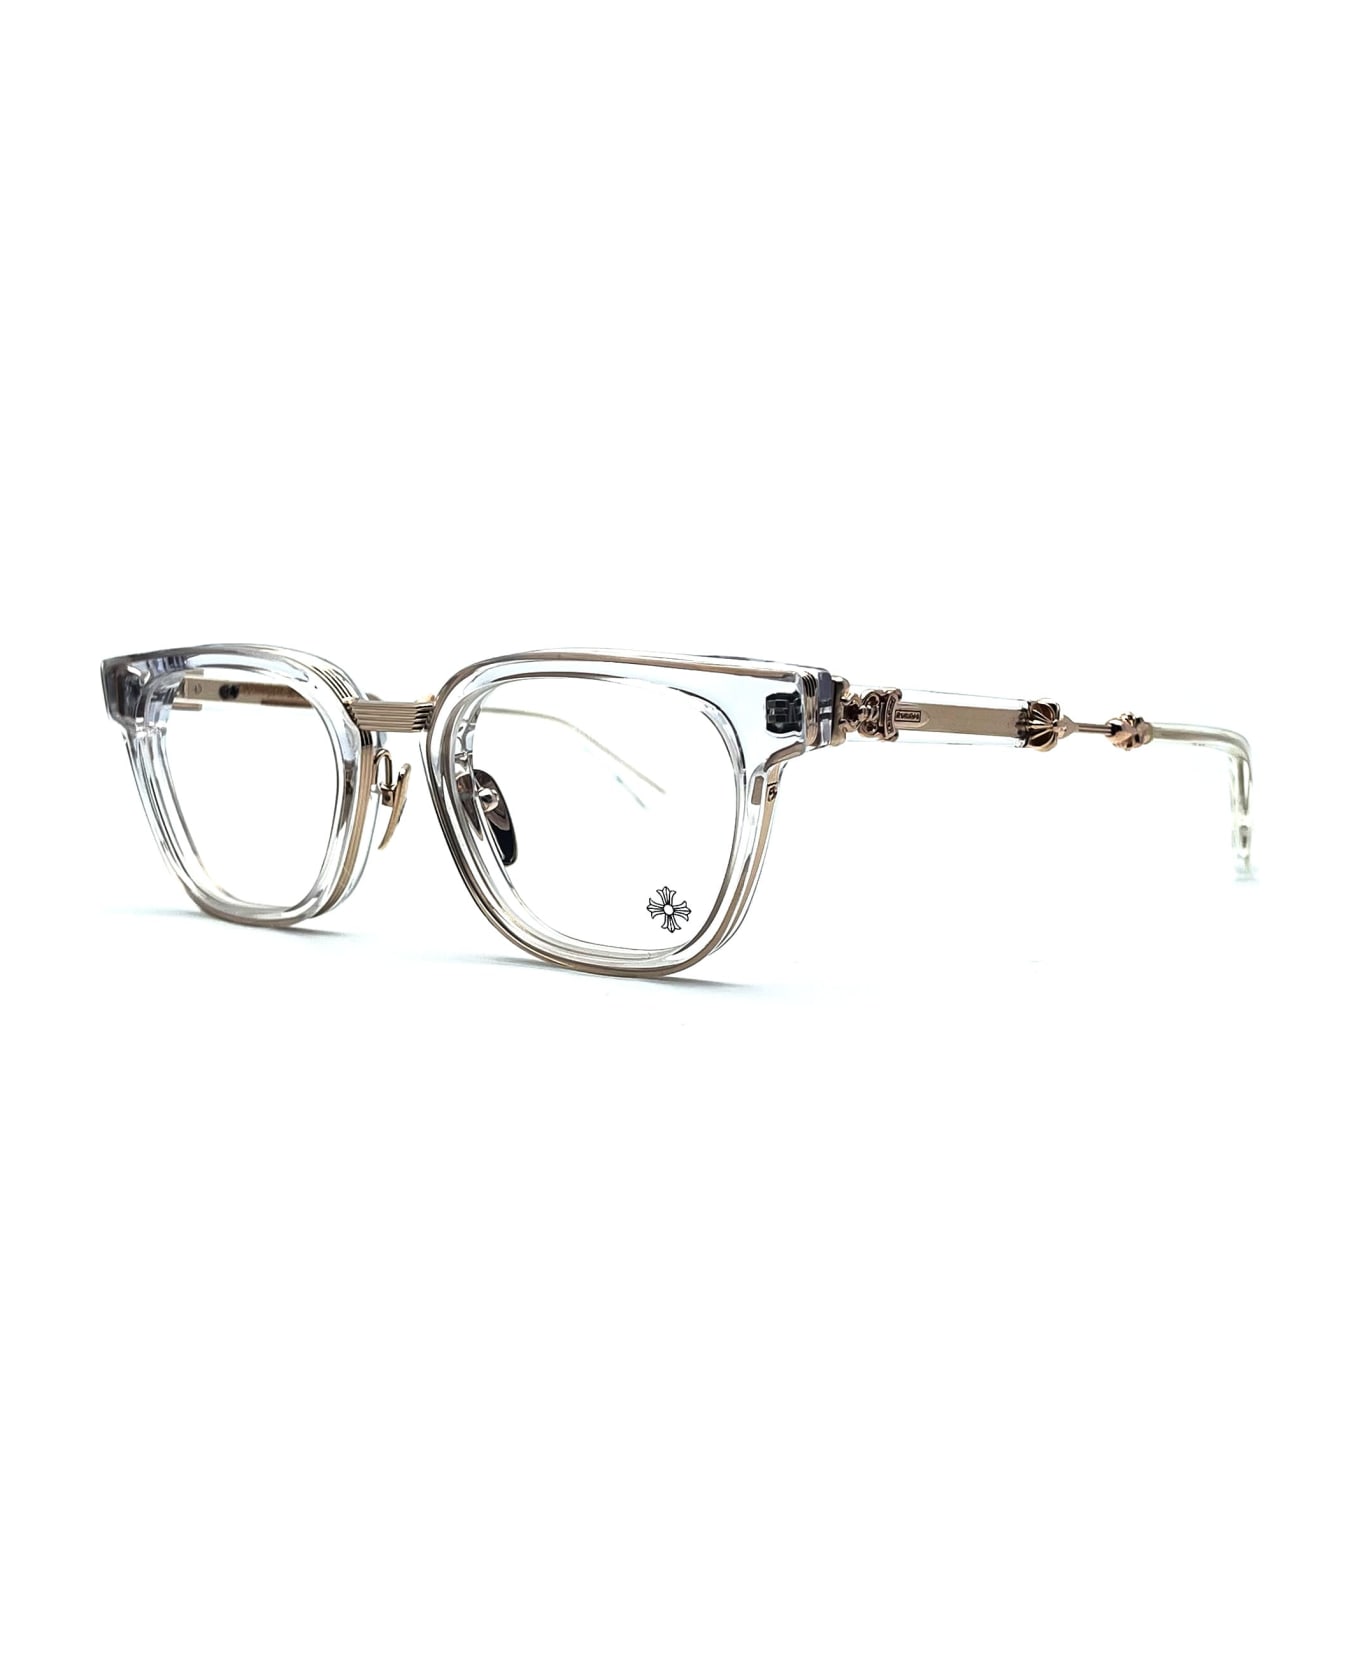 Chrome Hearts Duck Butter - Cristal / Gold Rx Glasses - Crystal